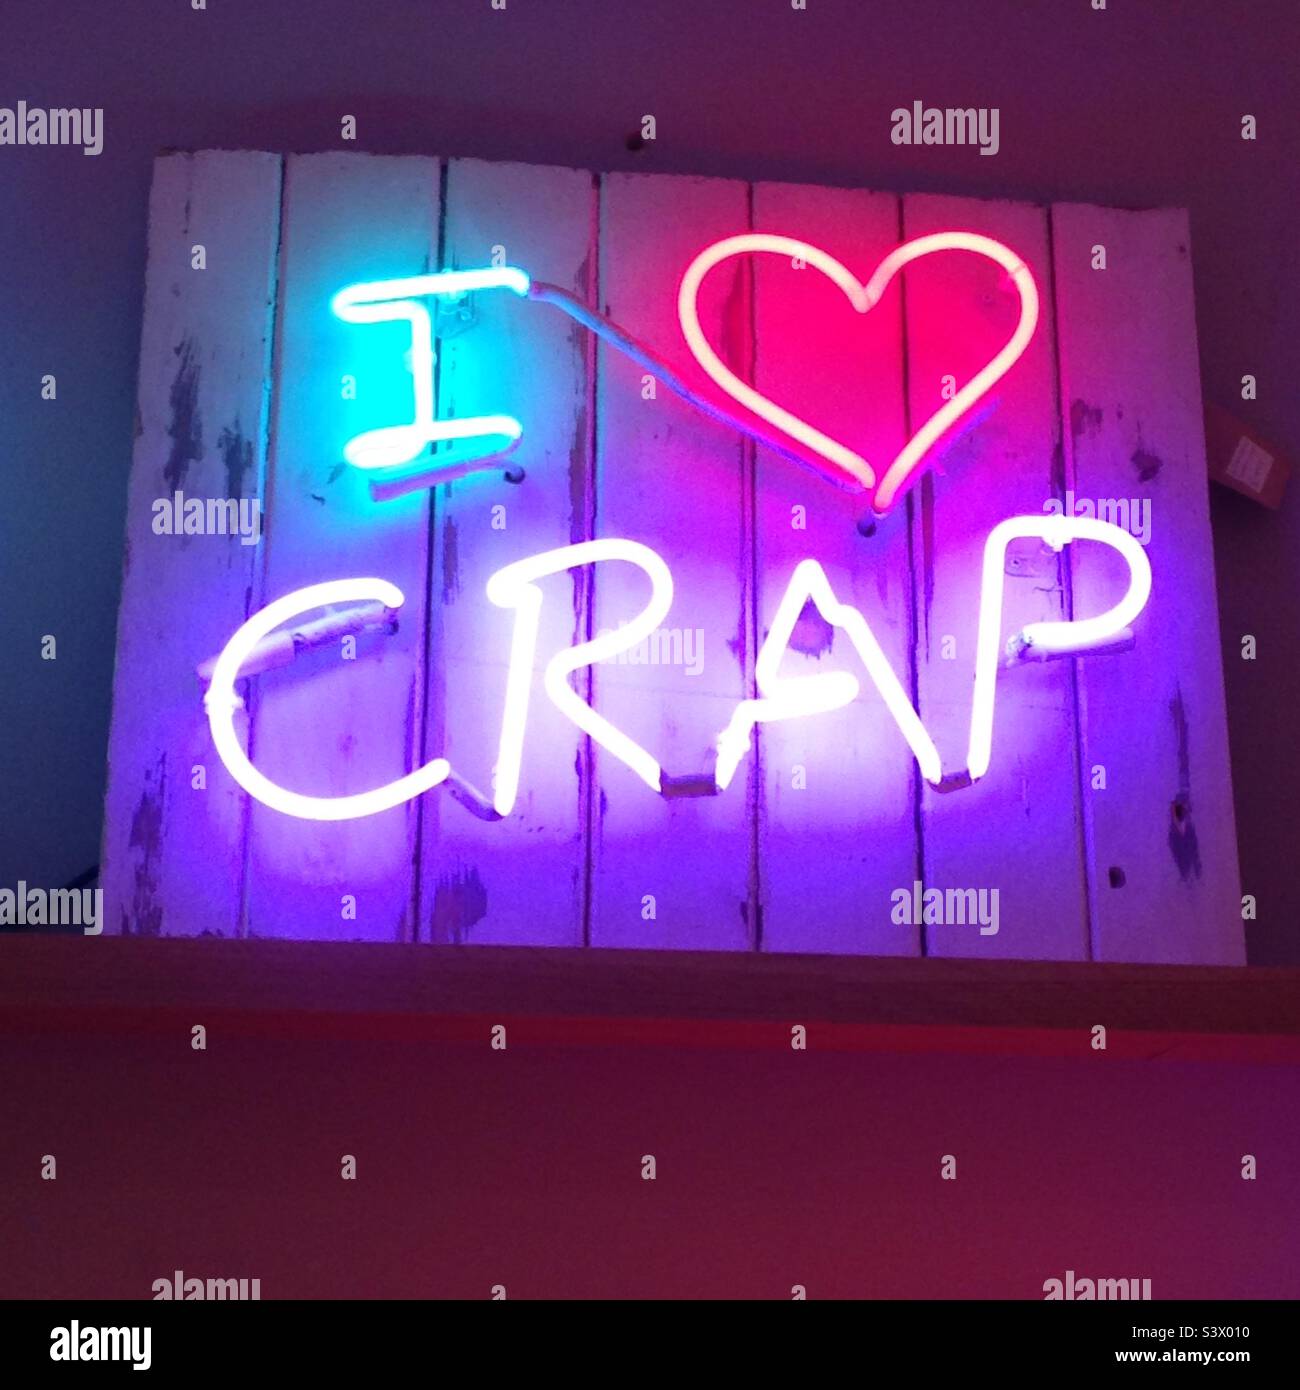 Neon art sign on sale in a shop in london the sign reads ‘I ❤️ crap’ Stock Photo